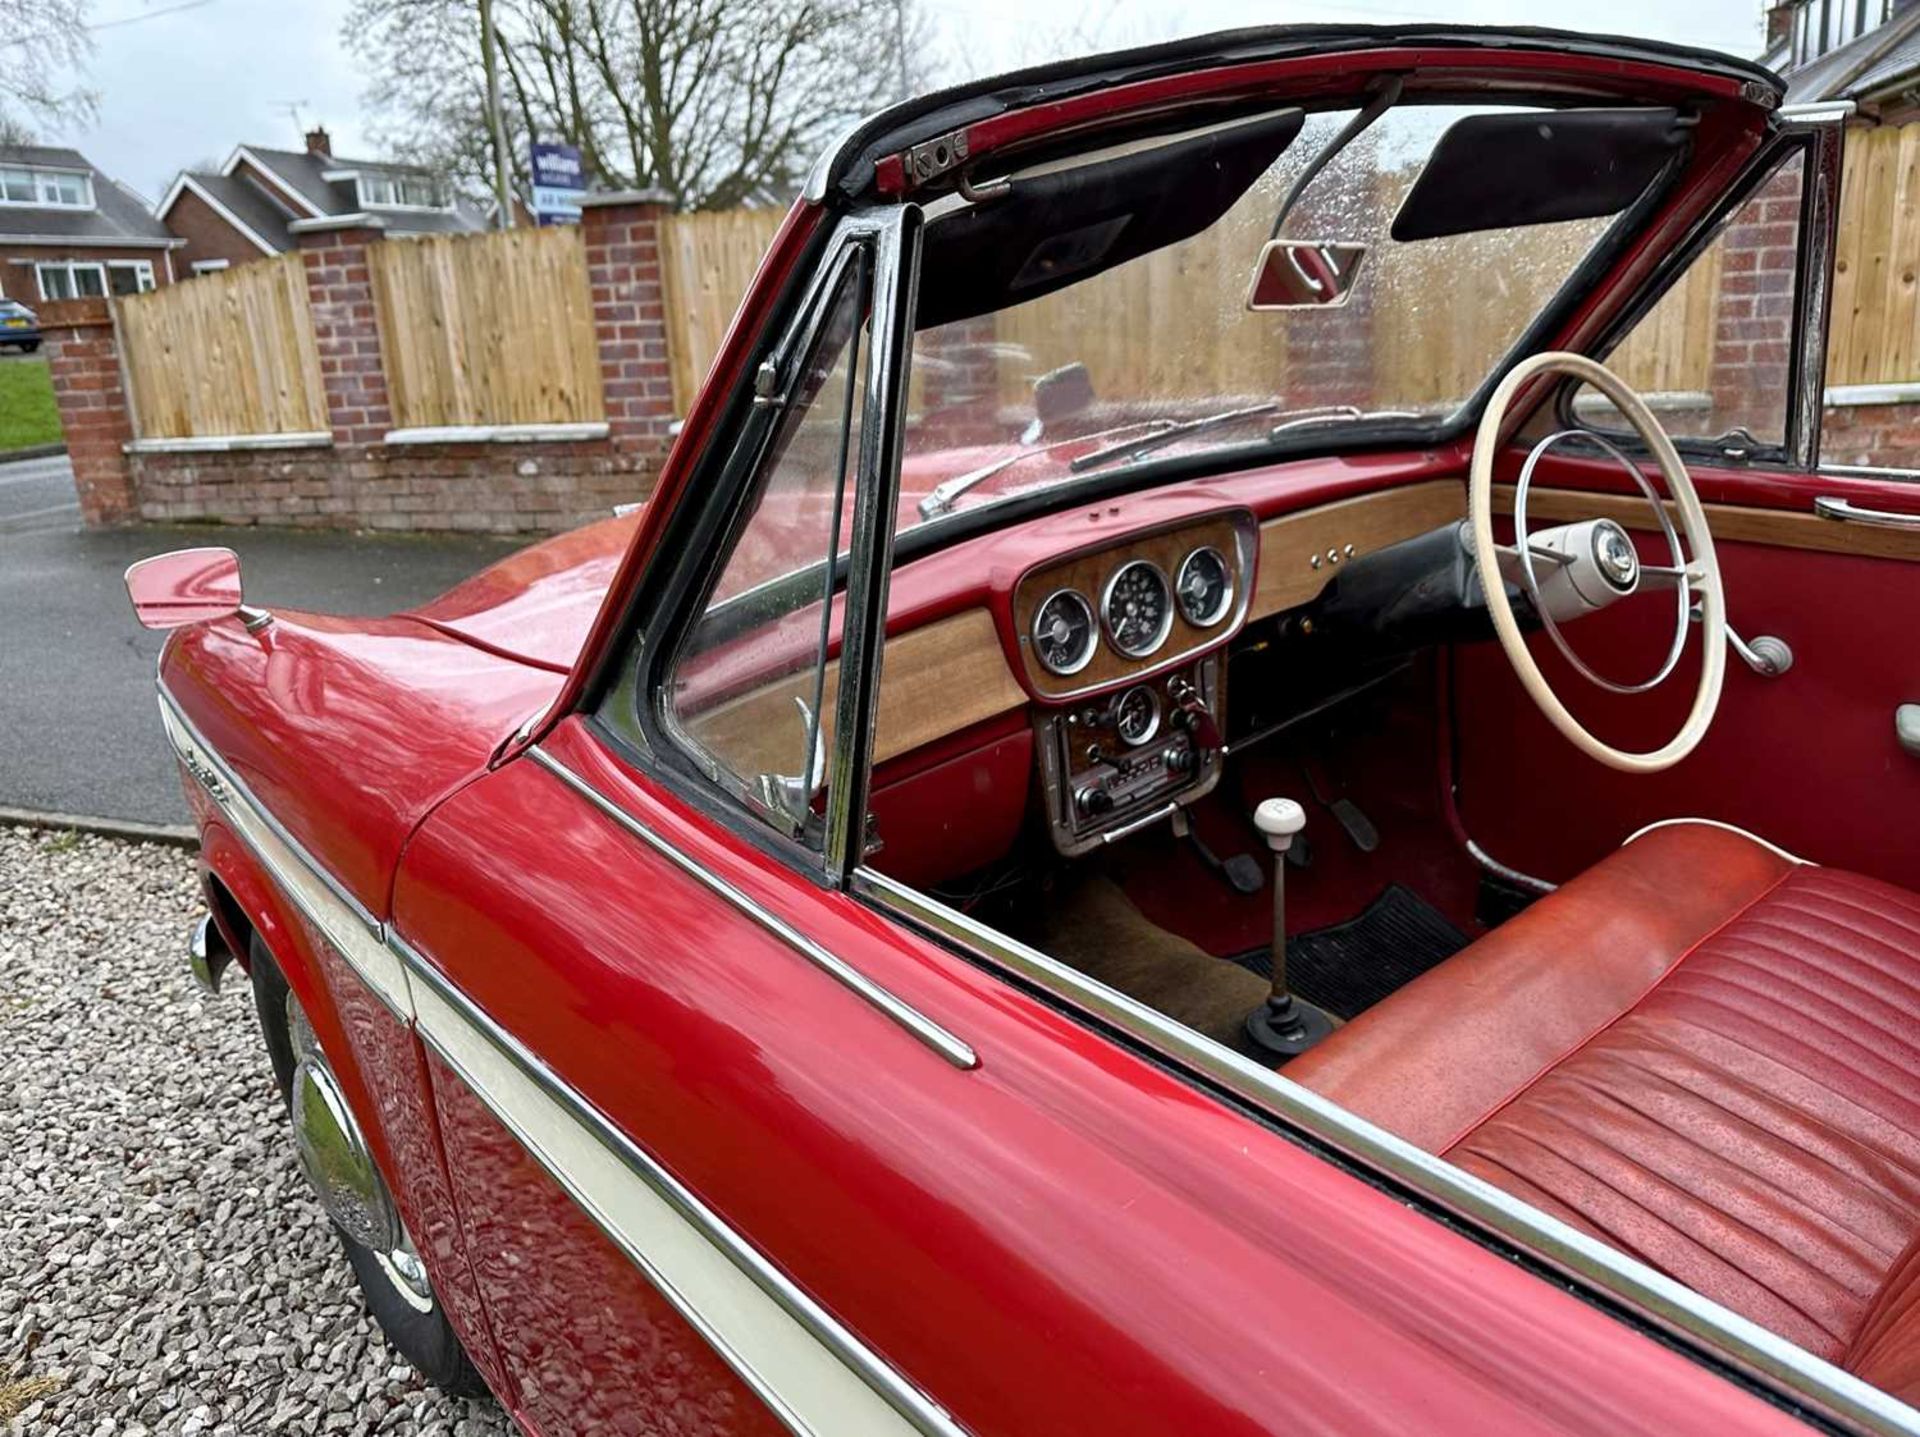 1961 Singer Gazelle Convertible Comes complete with overdrive, period radio and badge bar - Image 40 of 95